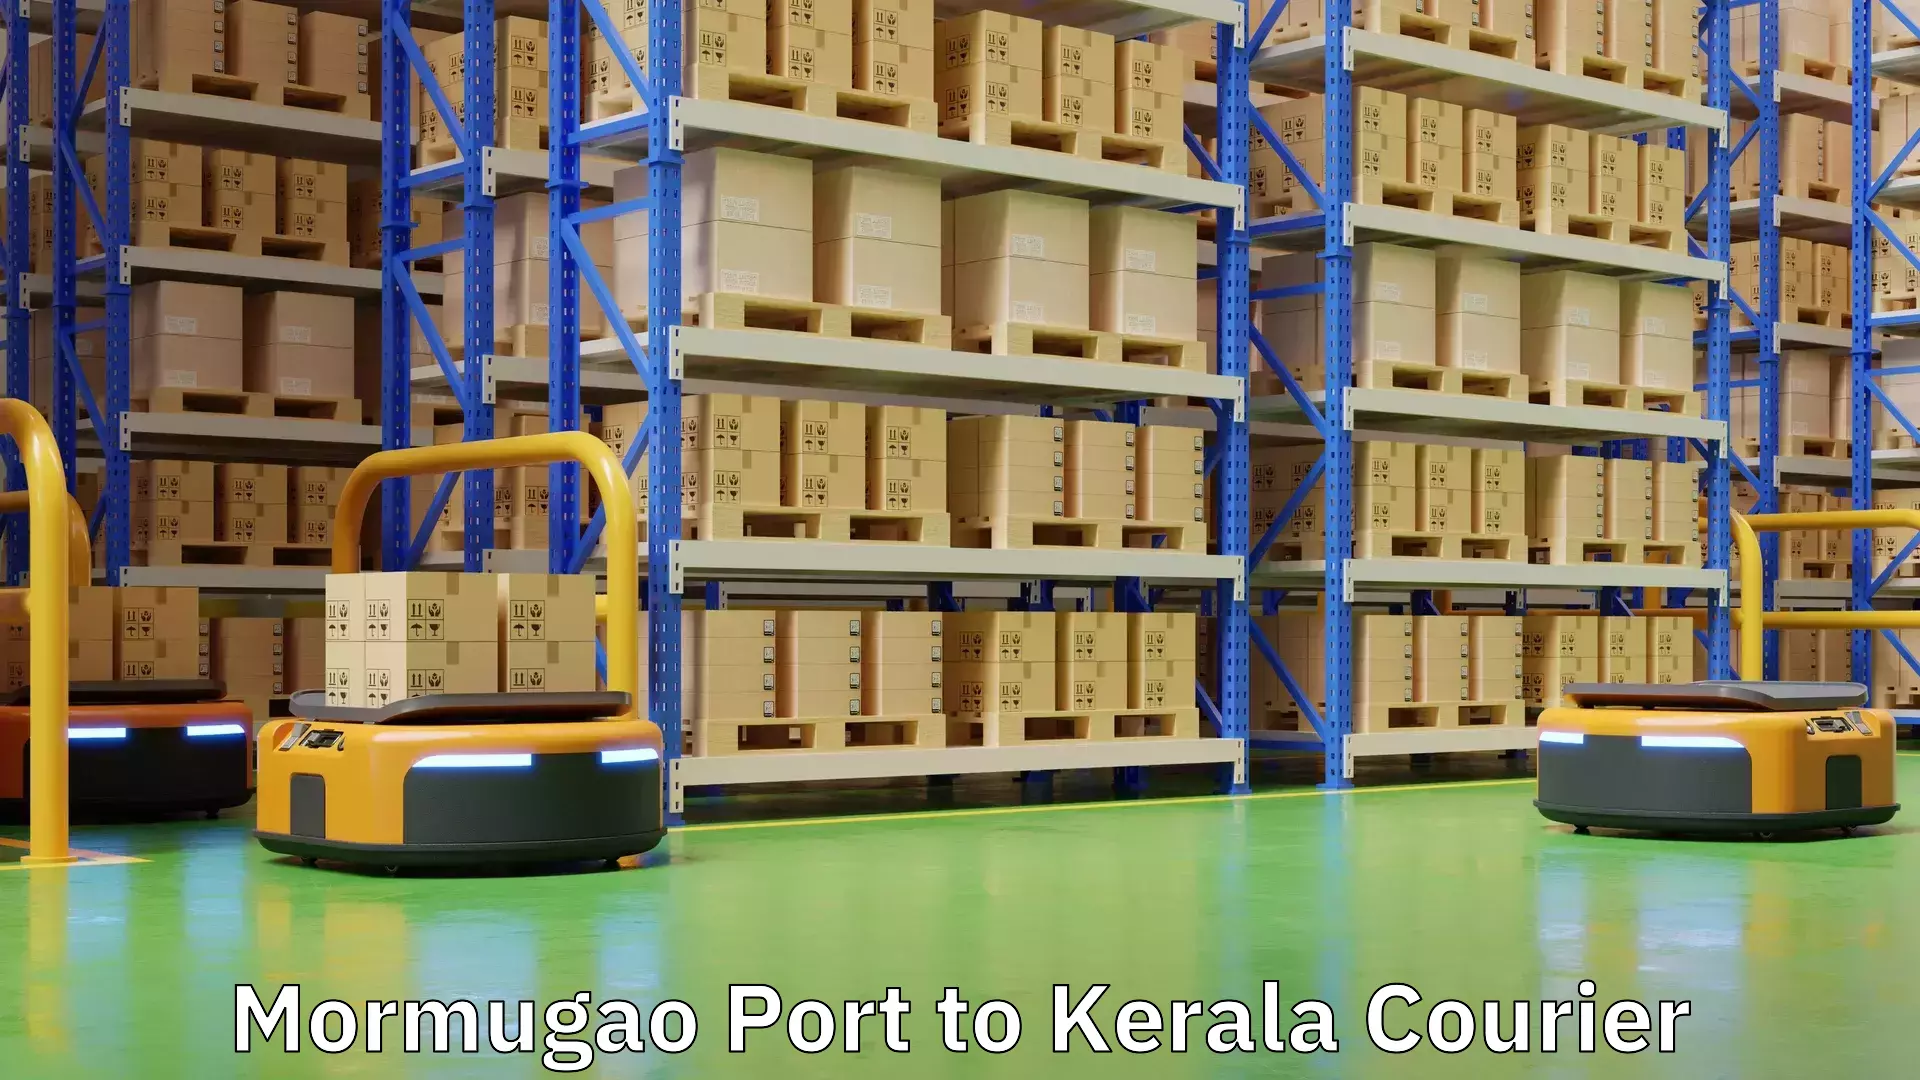 Courier dispatch services in Mormugao Port to Kerala